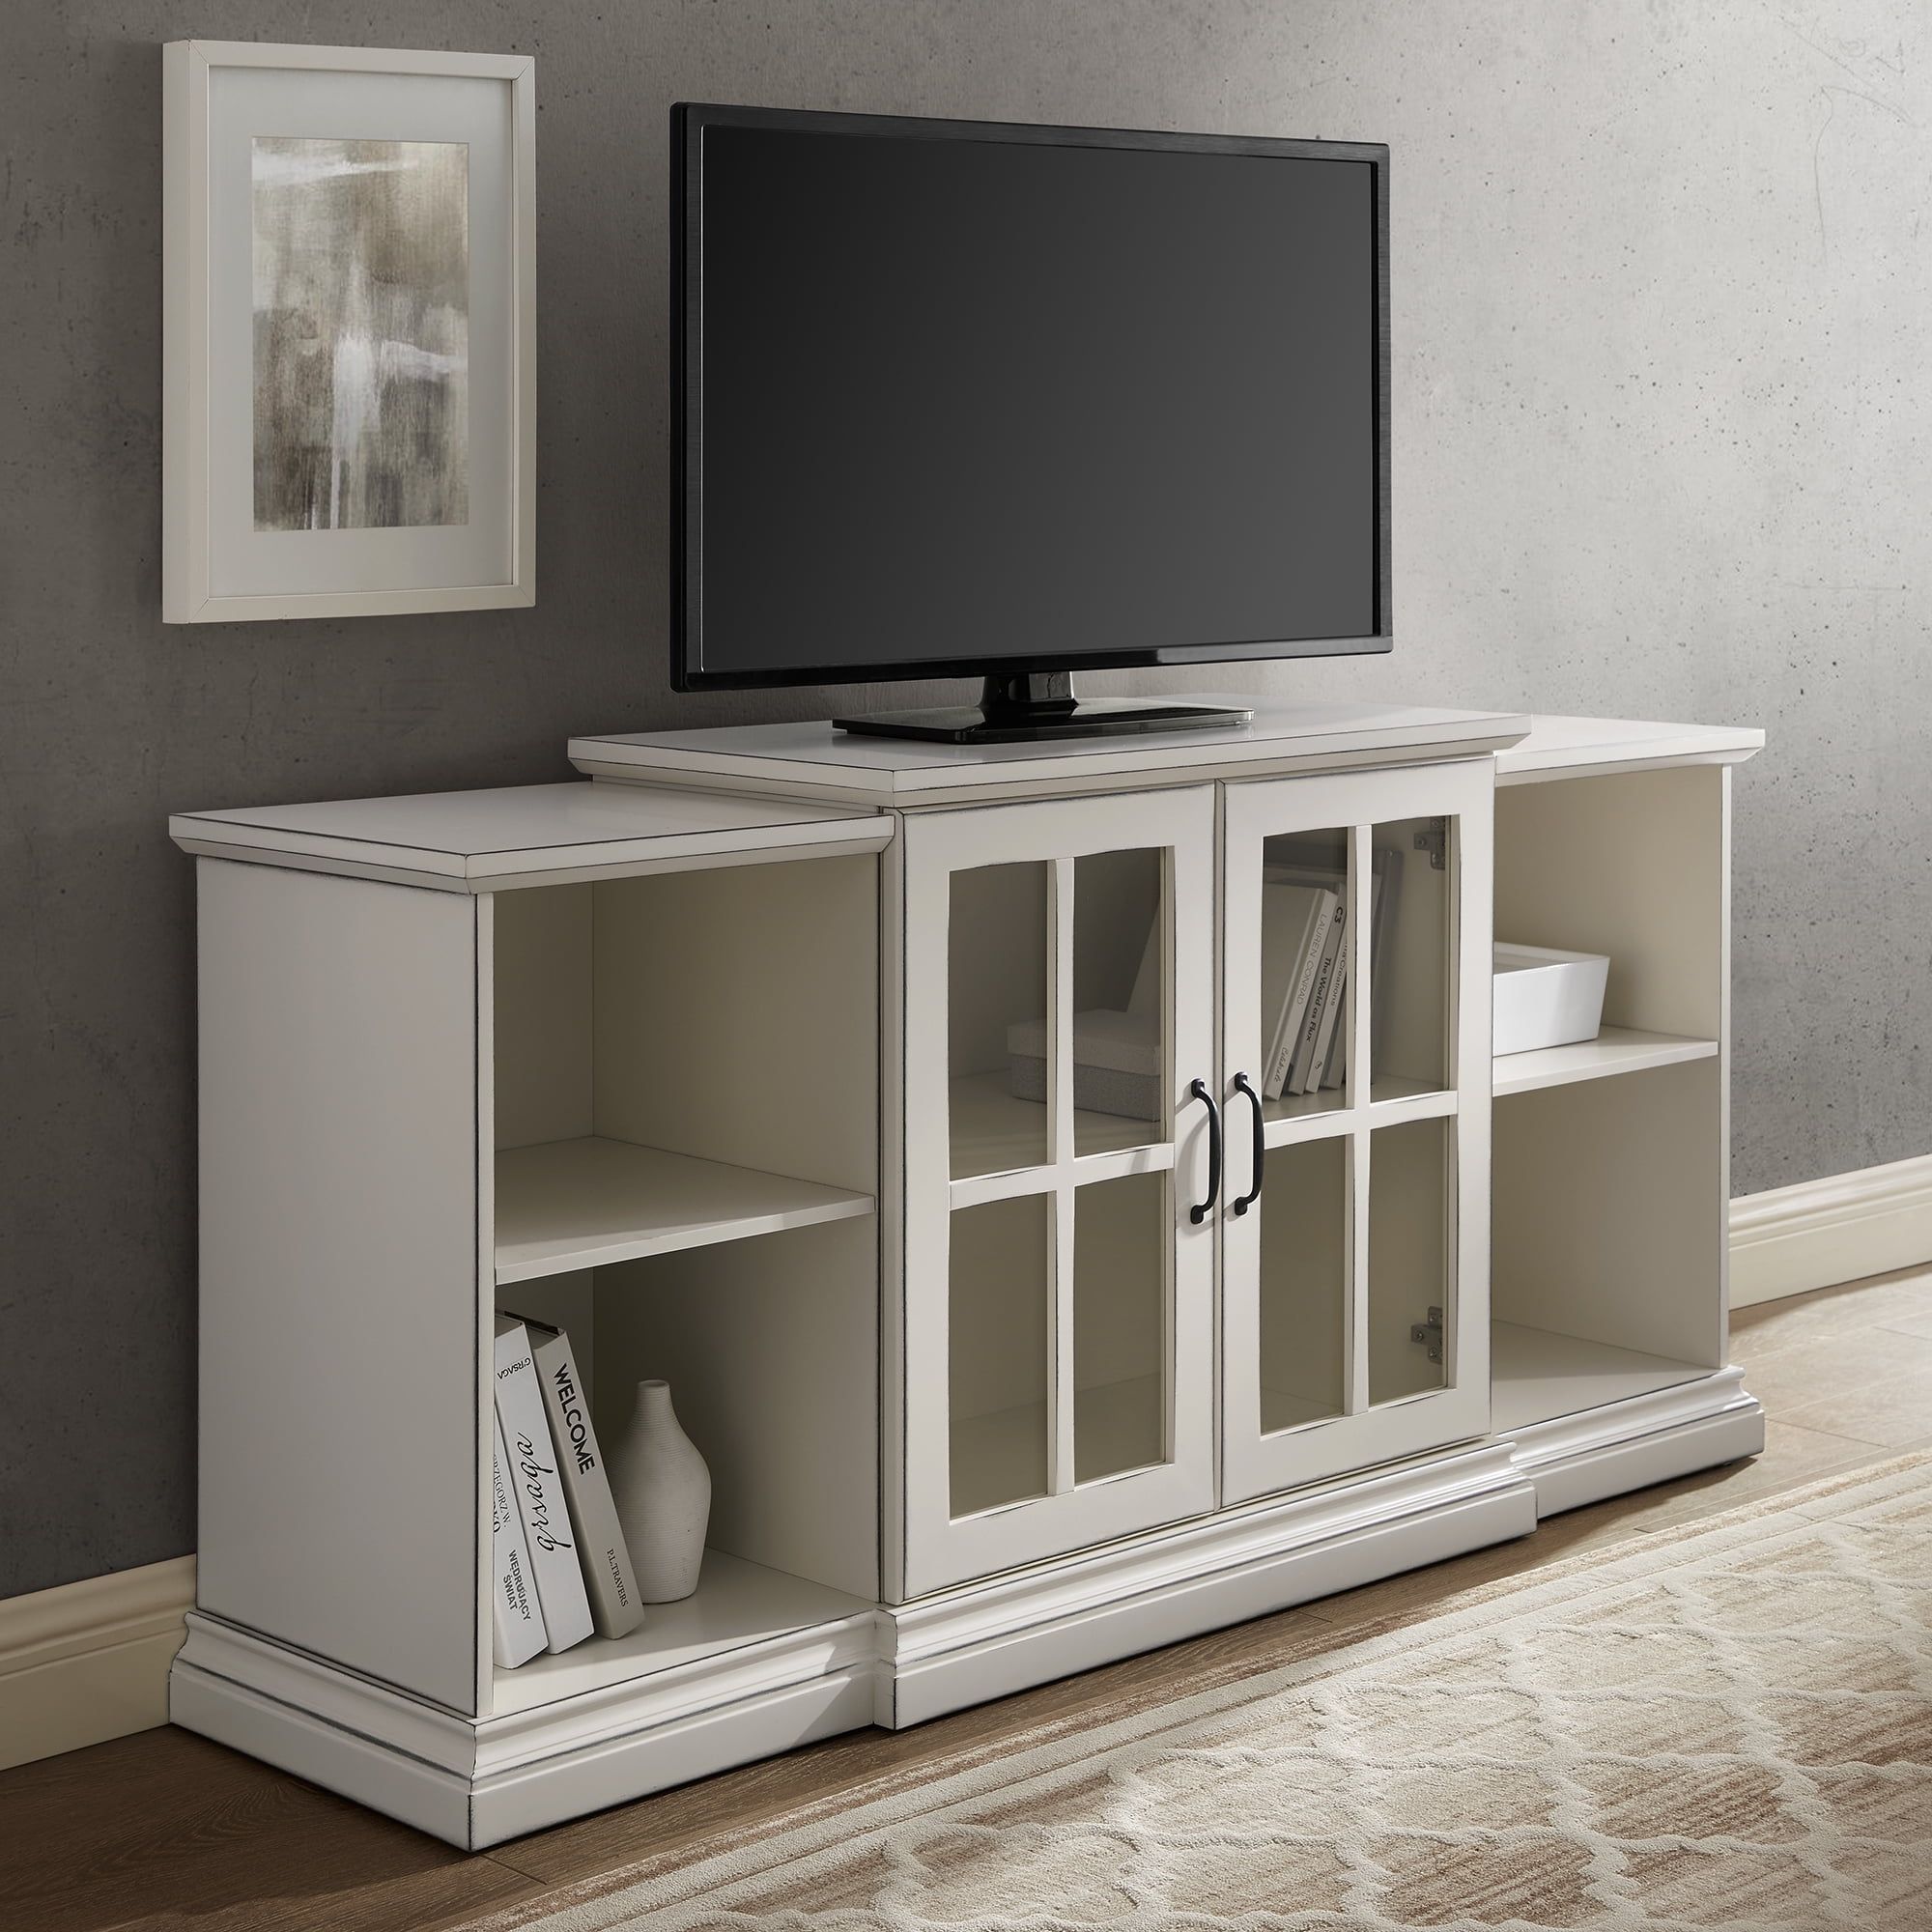 Manor Park Classic Tiered Tv Stand For Tvs Up To 65", Antique White Within Tier Stands For Tvs (View 7 of 20)